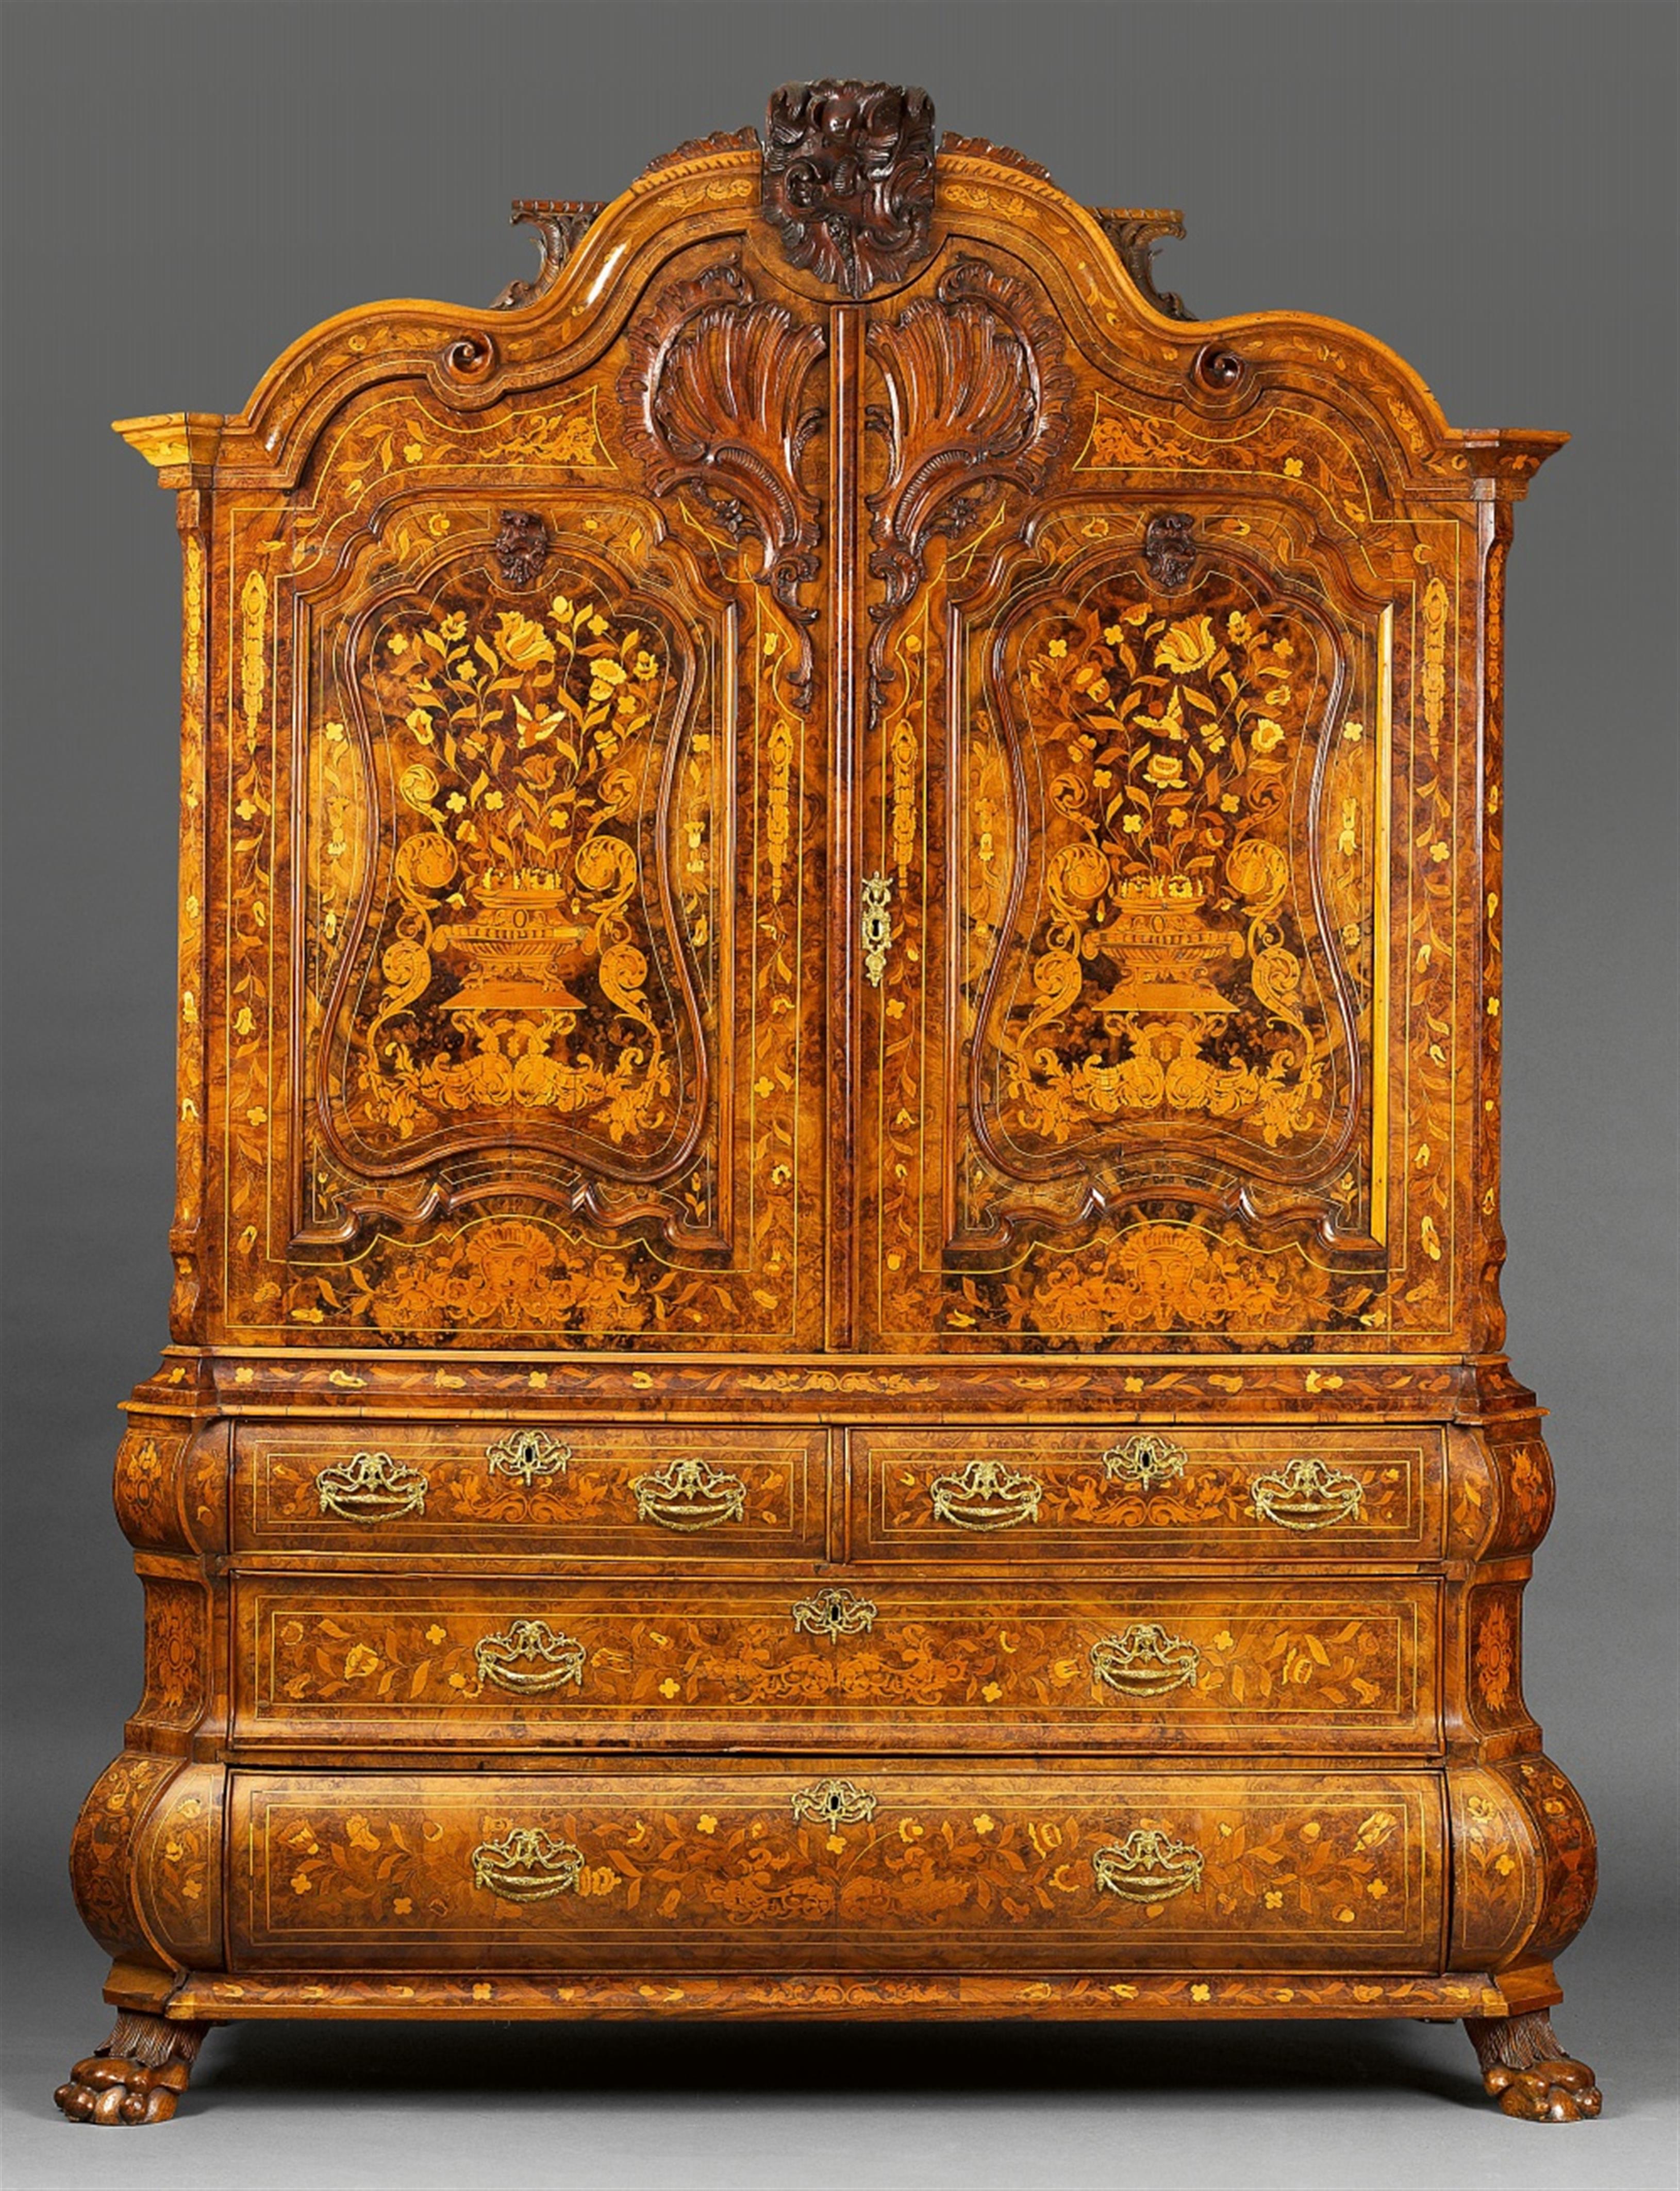 A 19th century Netherlandish Baroque Revival commode - image-1